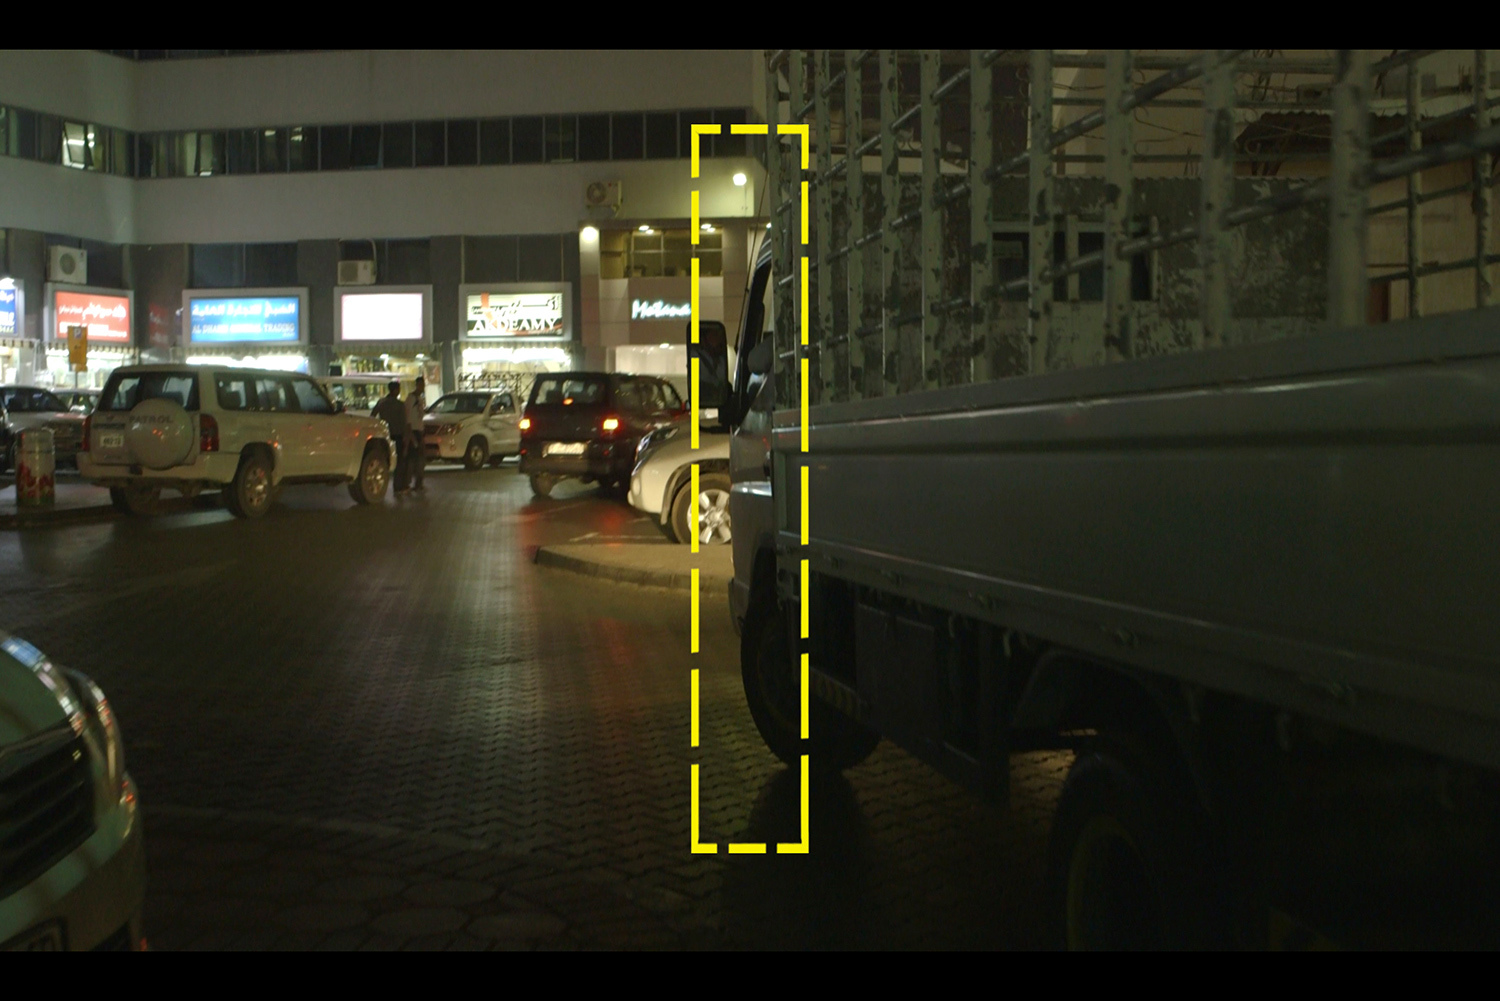  Footage Still  Highlighted in Yellow - video cropping in ratio to Boundary wall’s cross section dimensions 